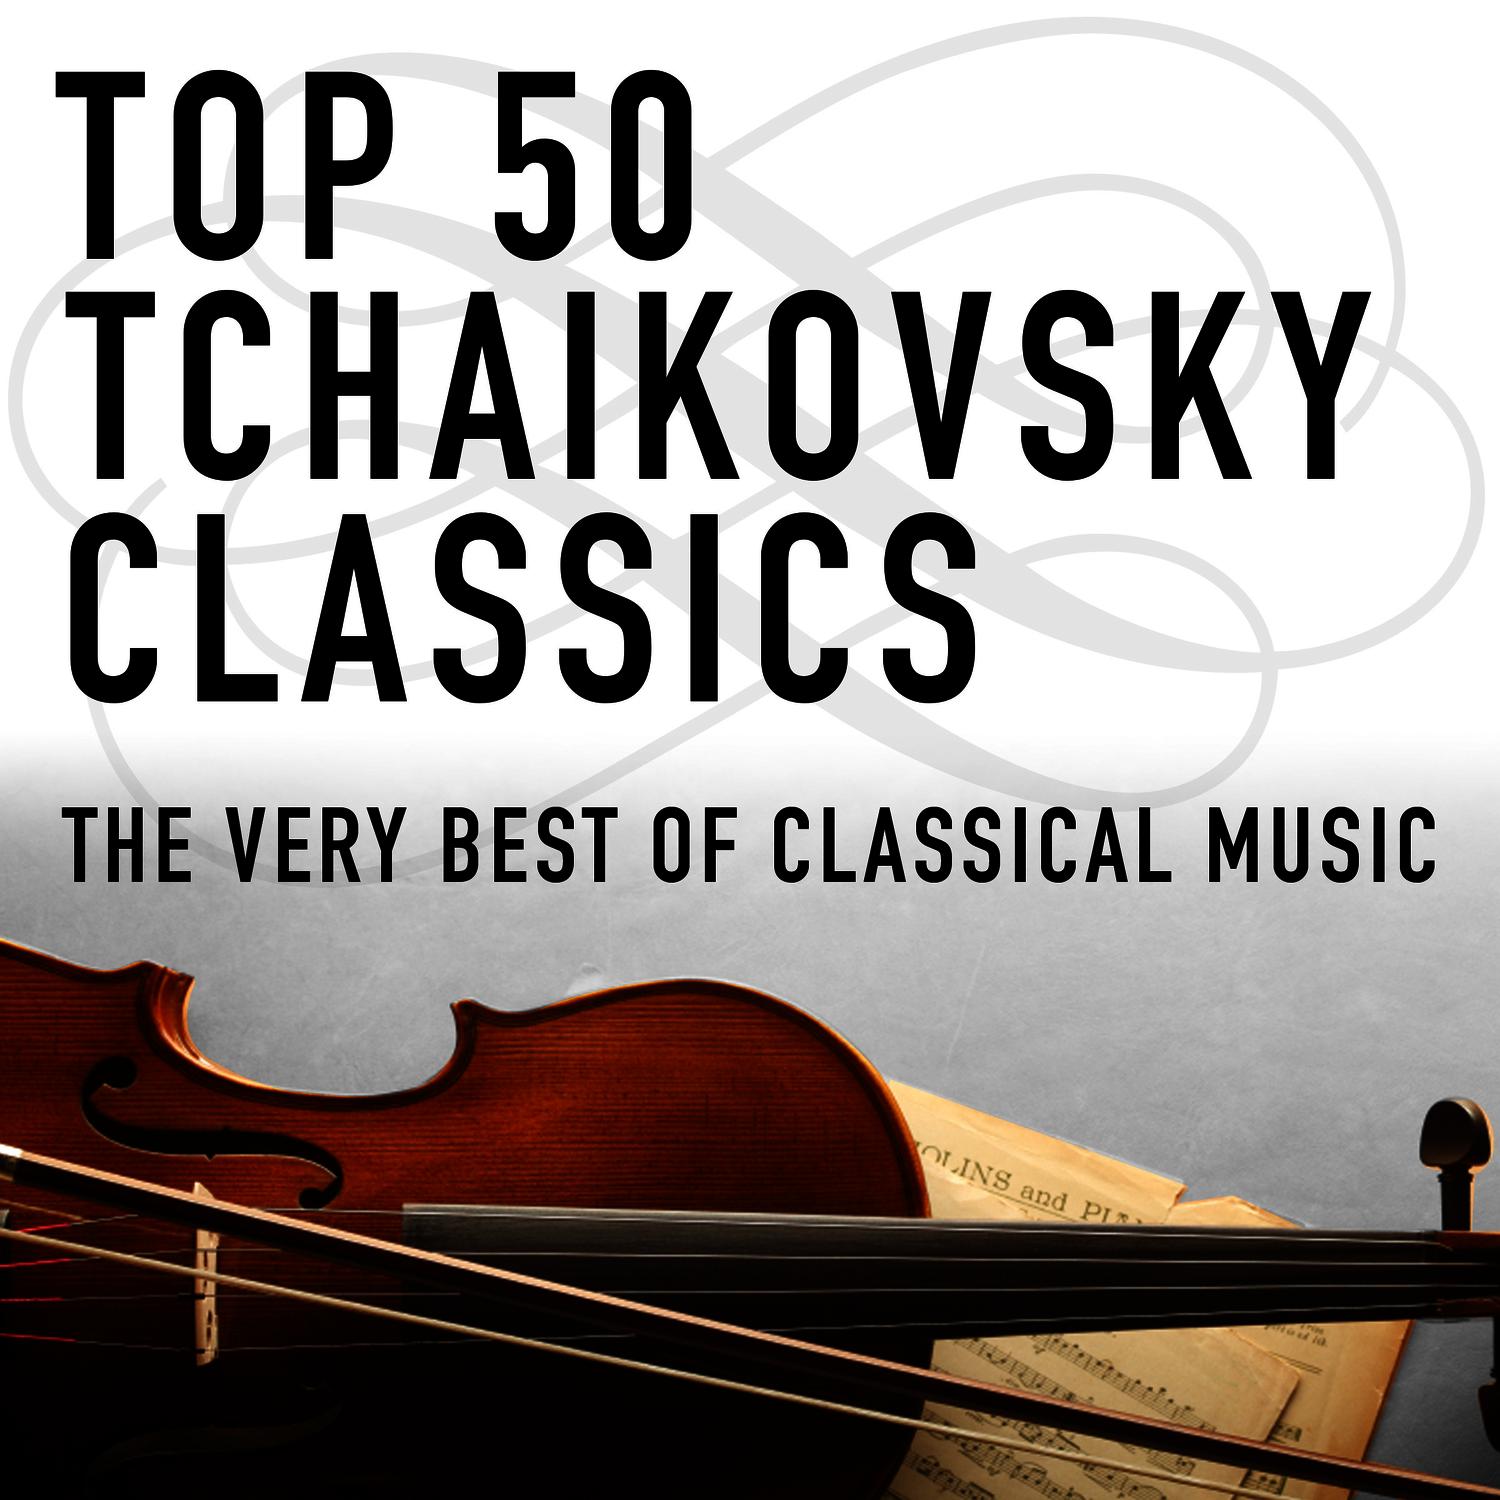 Top 50 Tchaikovsky Classics - The Very Best of Classical Music